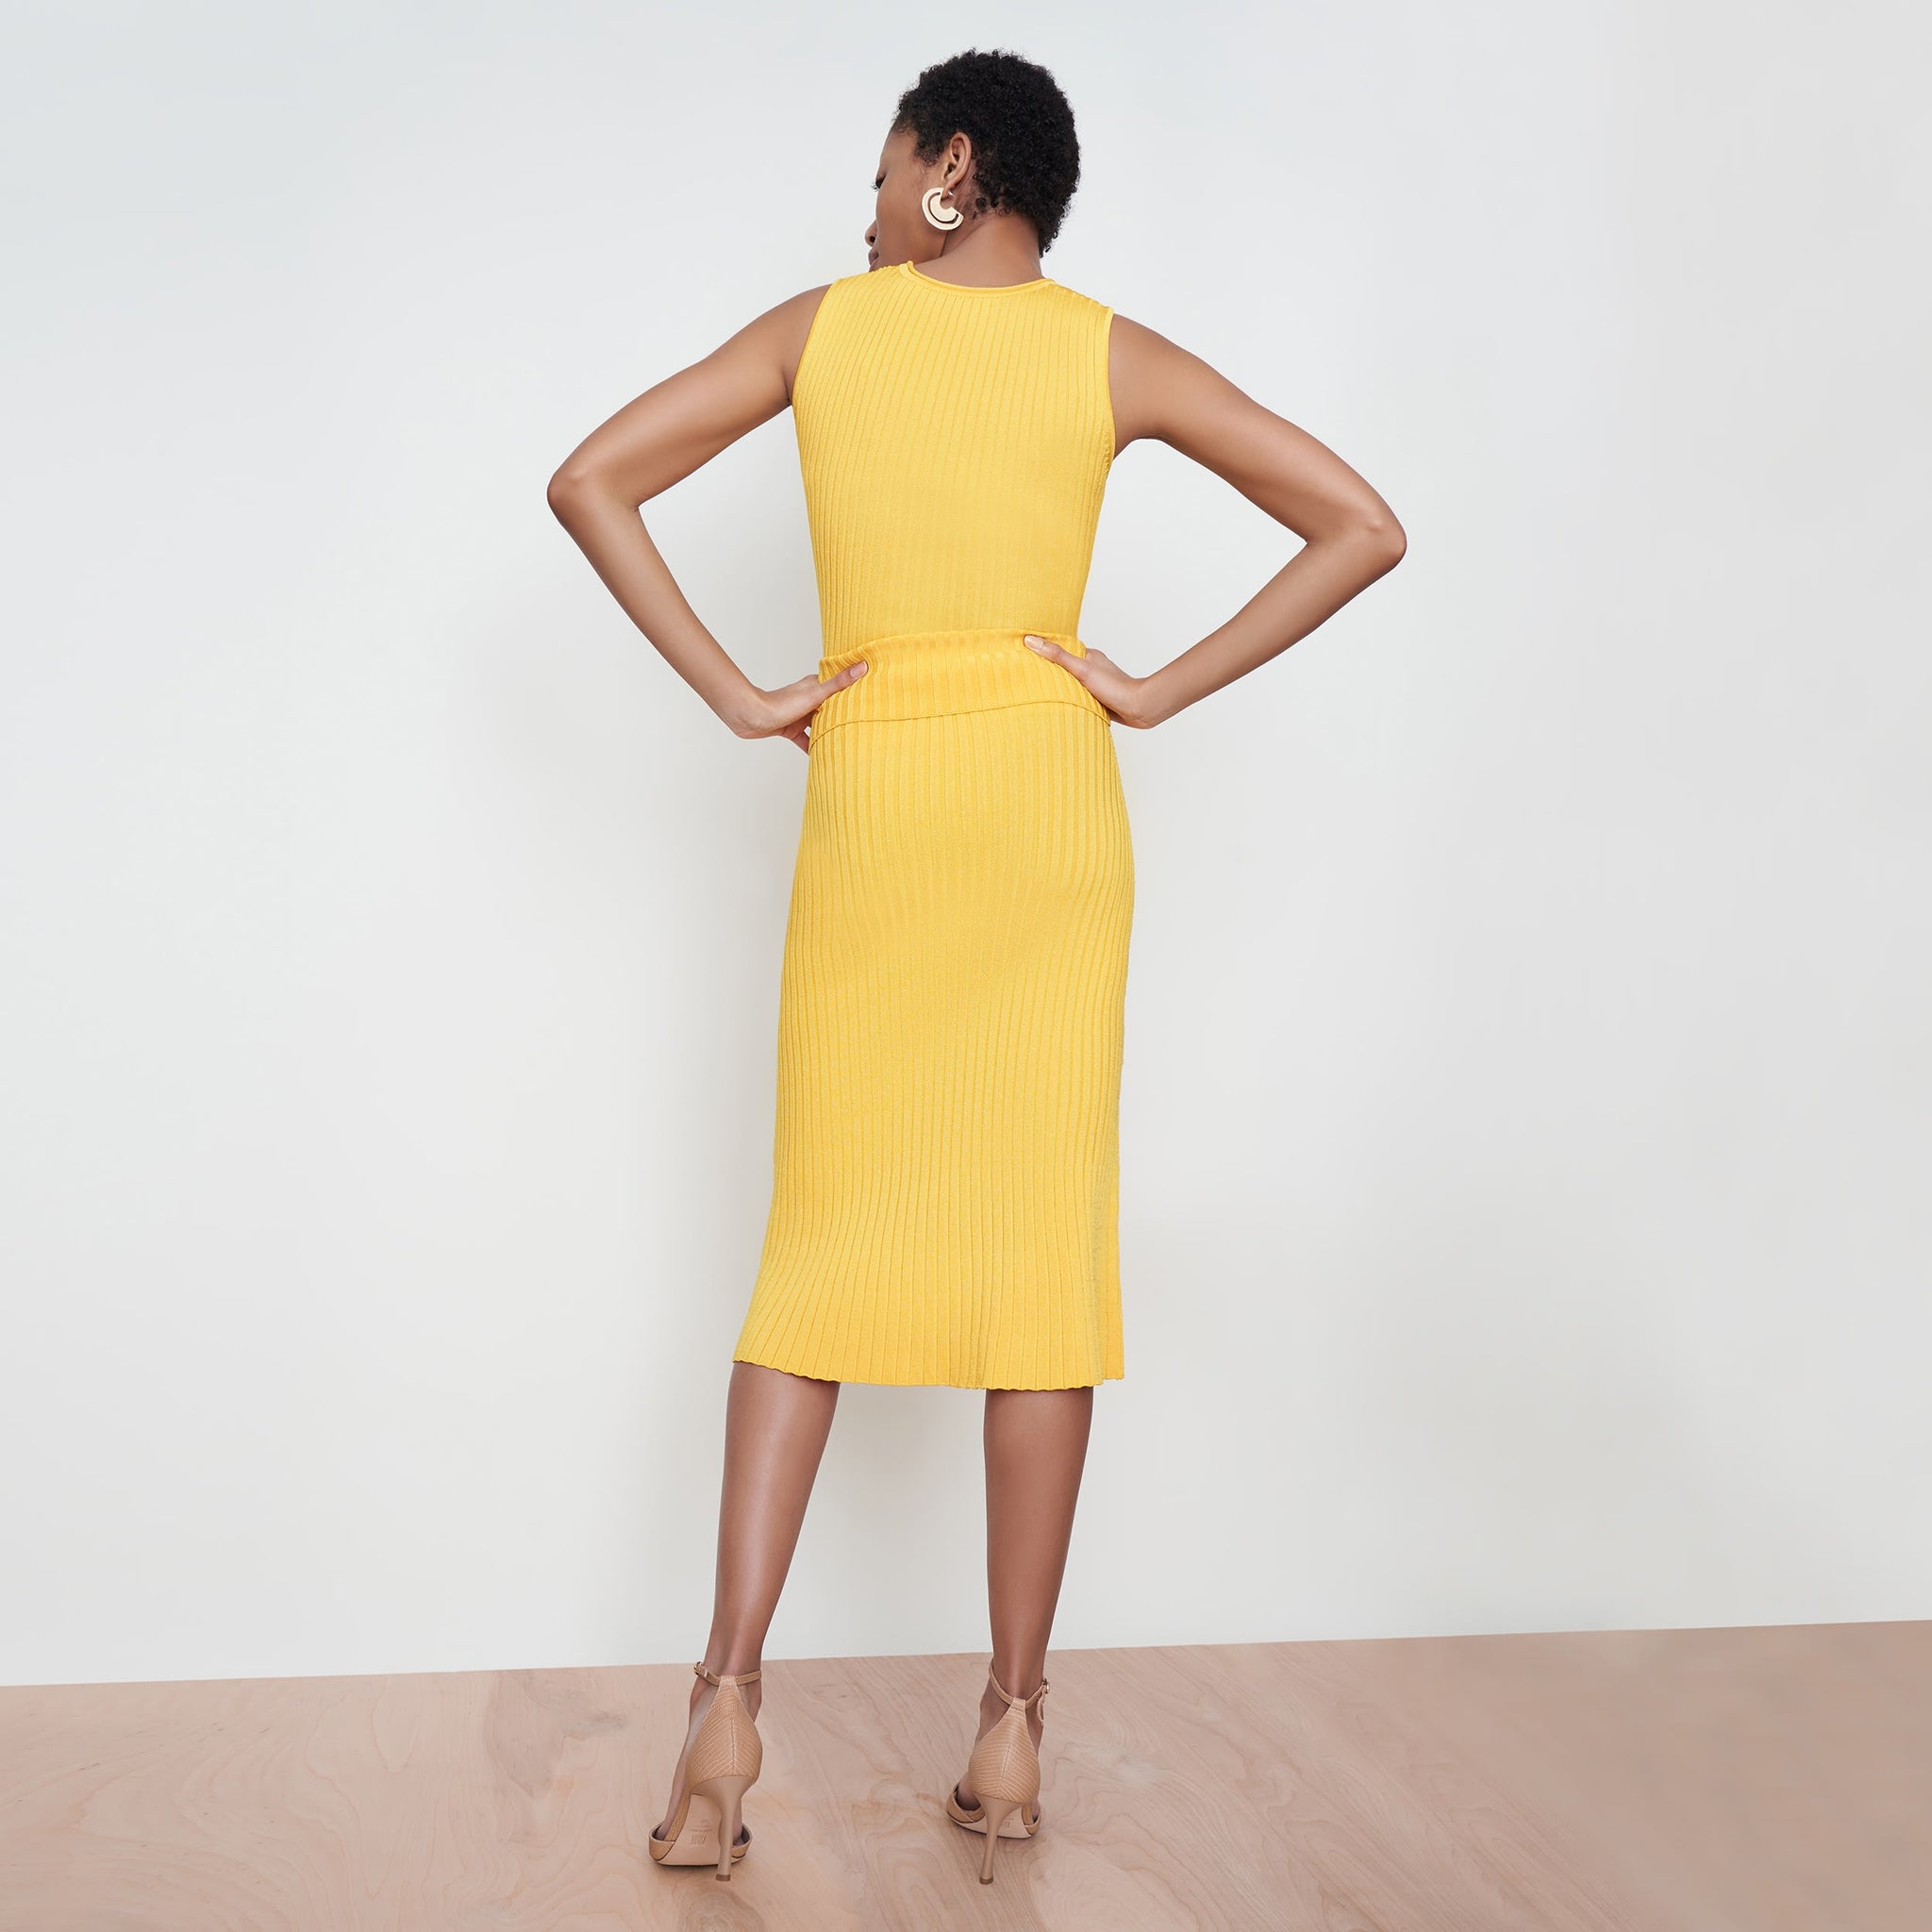 Back image of a woman standing wearing the York Skirt in Tuscan Yellow